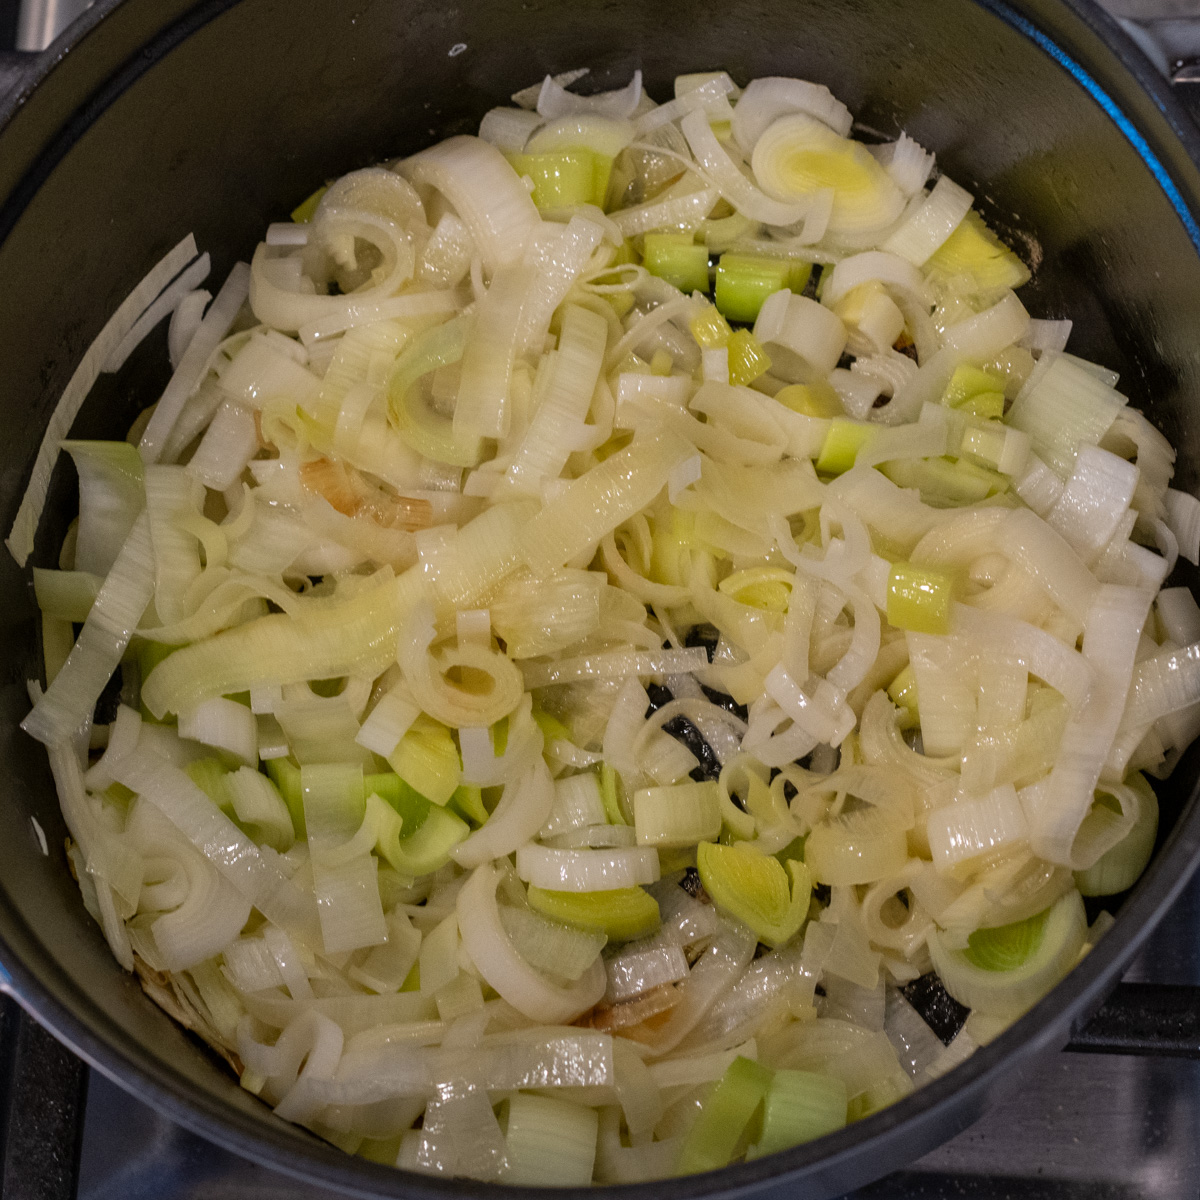 Cook the leeks in a Dutch oven.